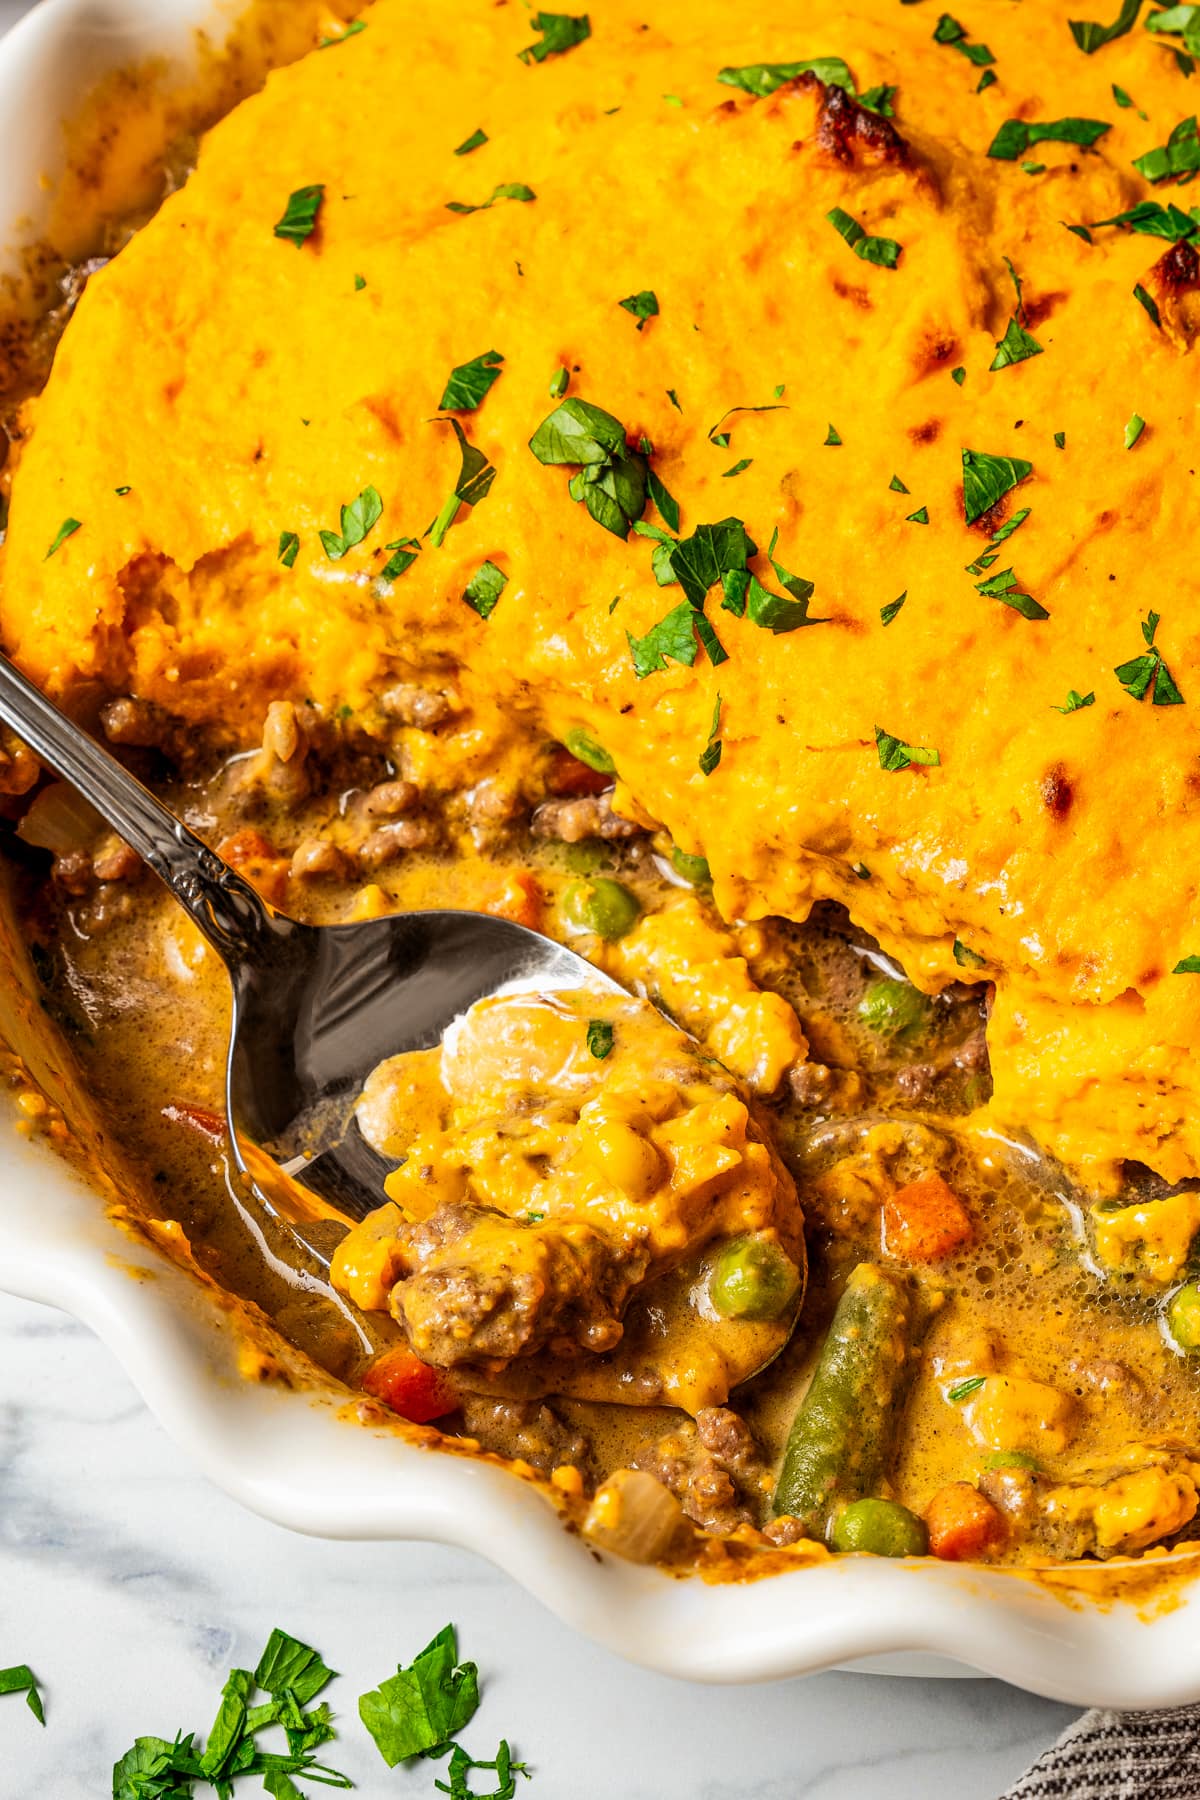 A spoon digging into a Shepherd's pie.